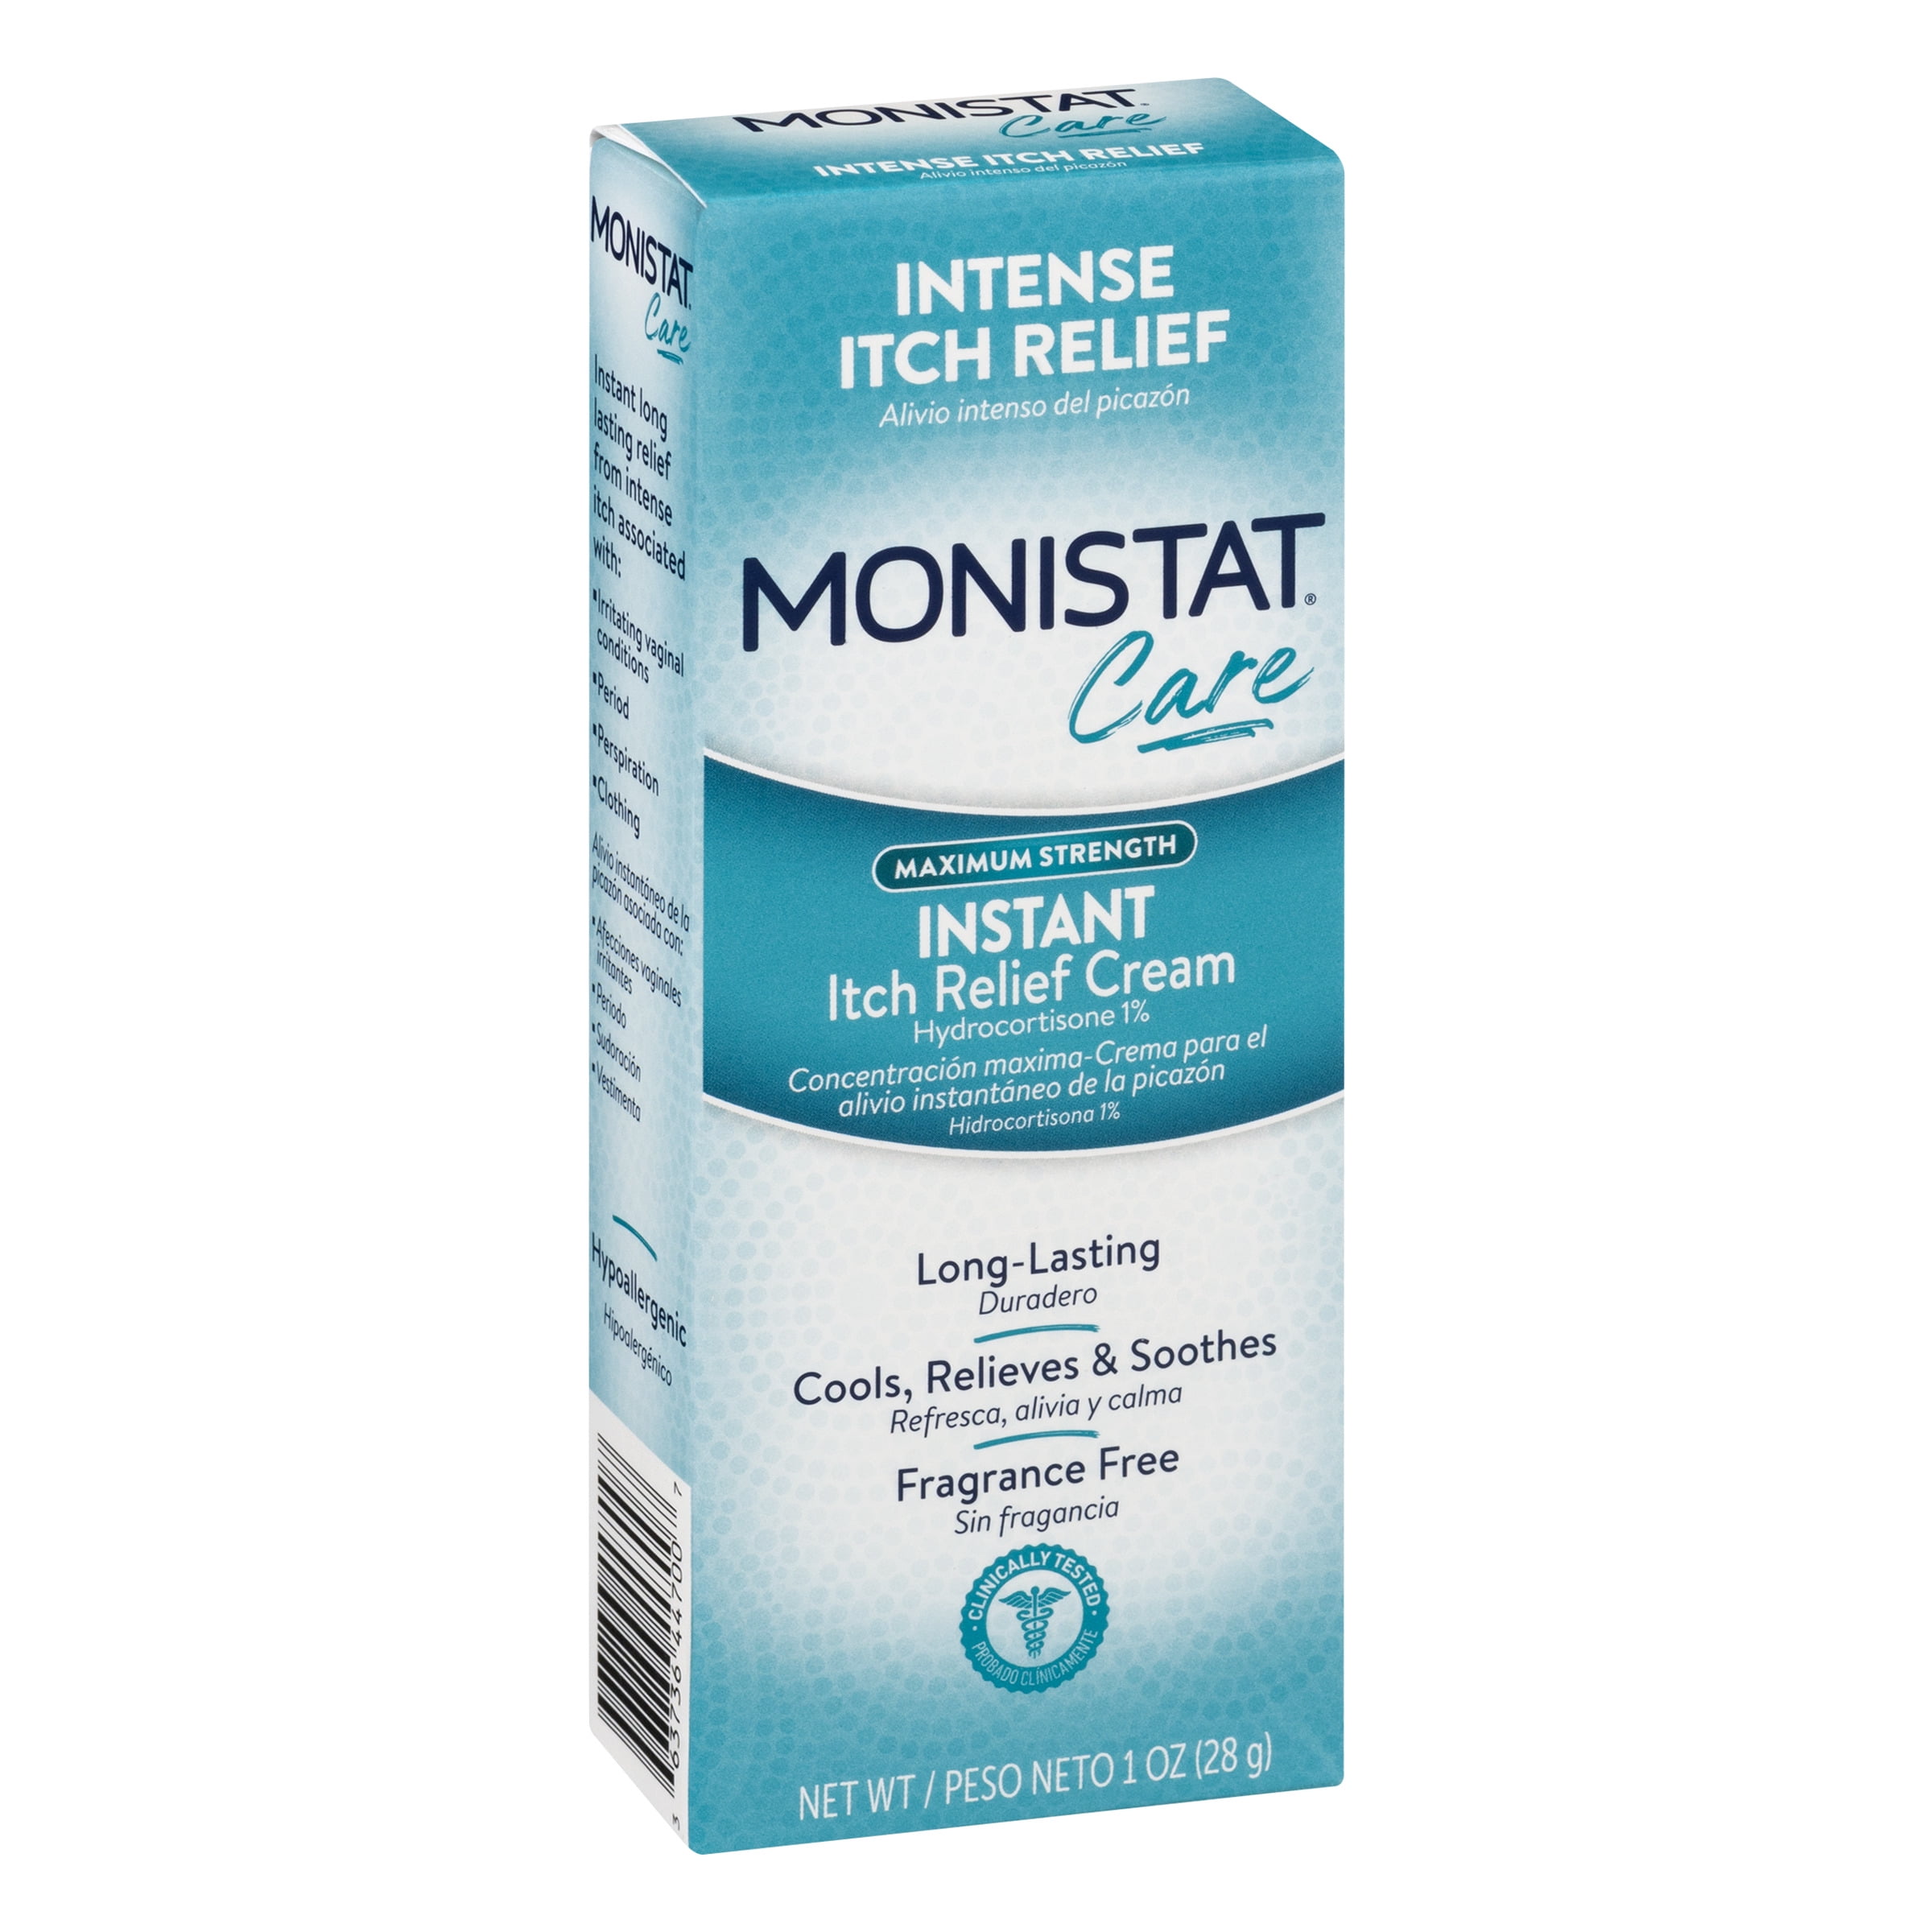 Monistat care instant itch relief spray